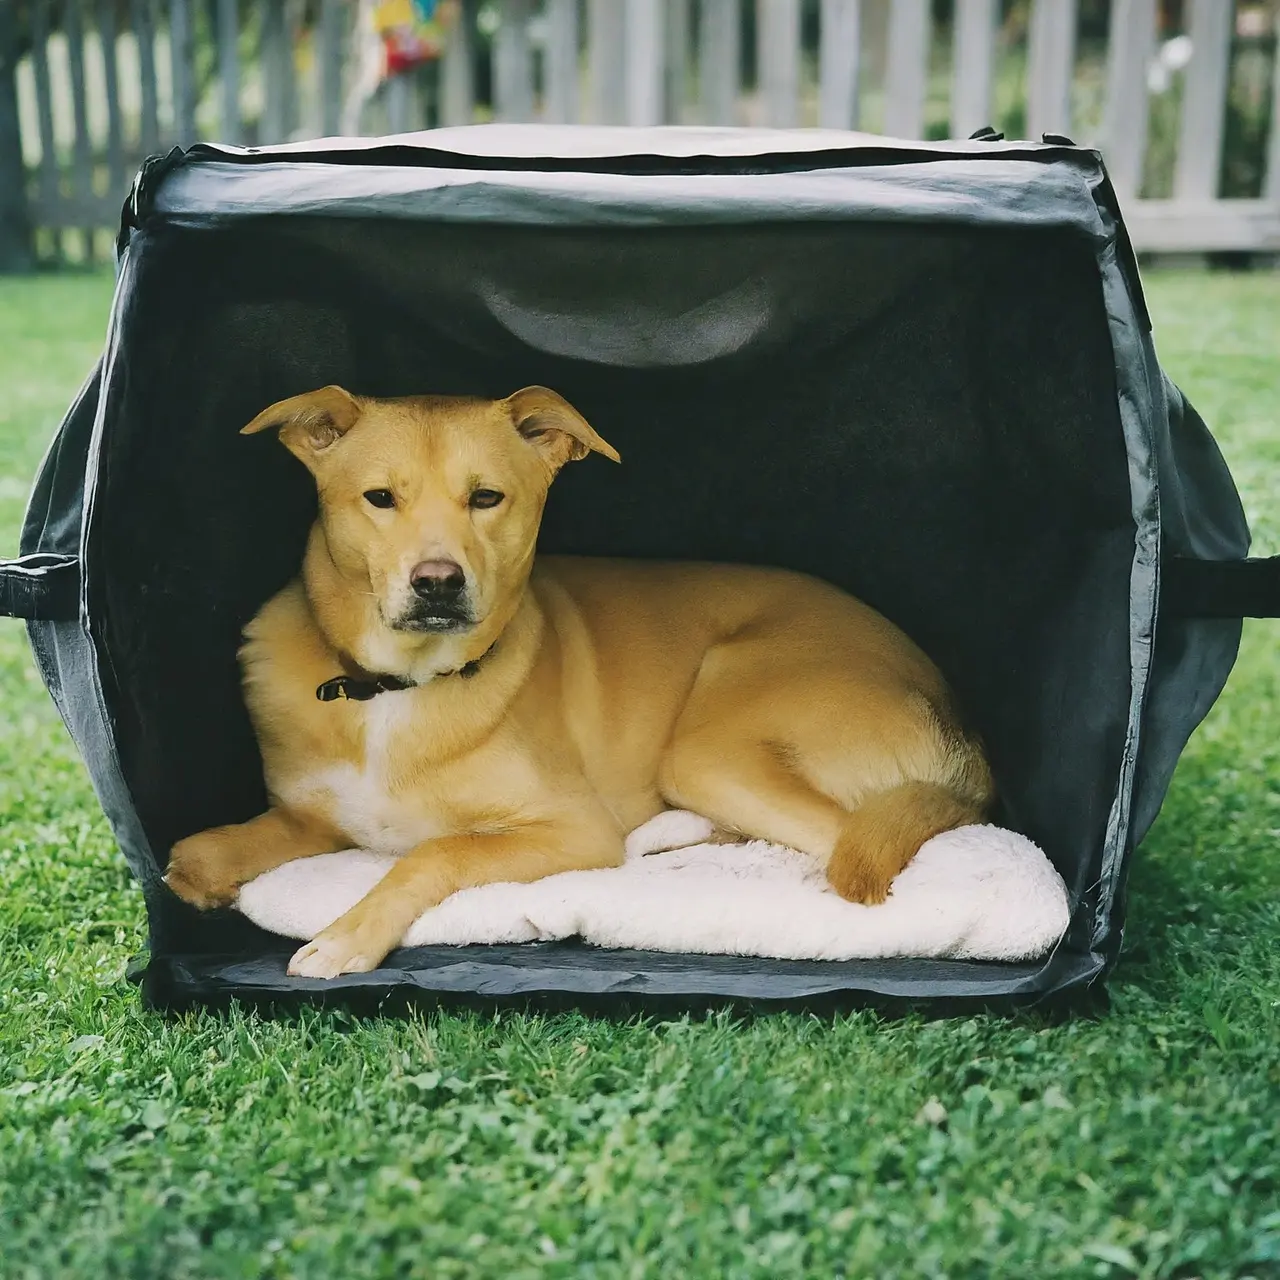 A dog resting inside a collapsible crate. 35mm stock photo